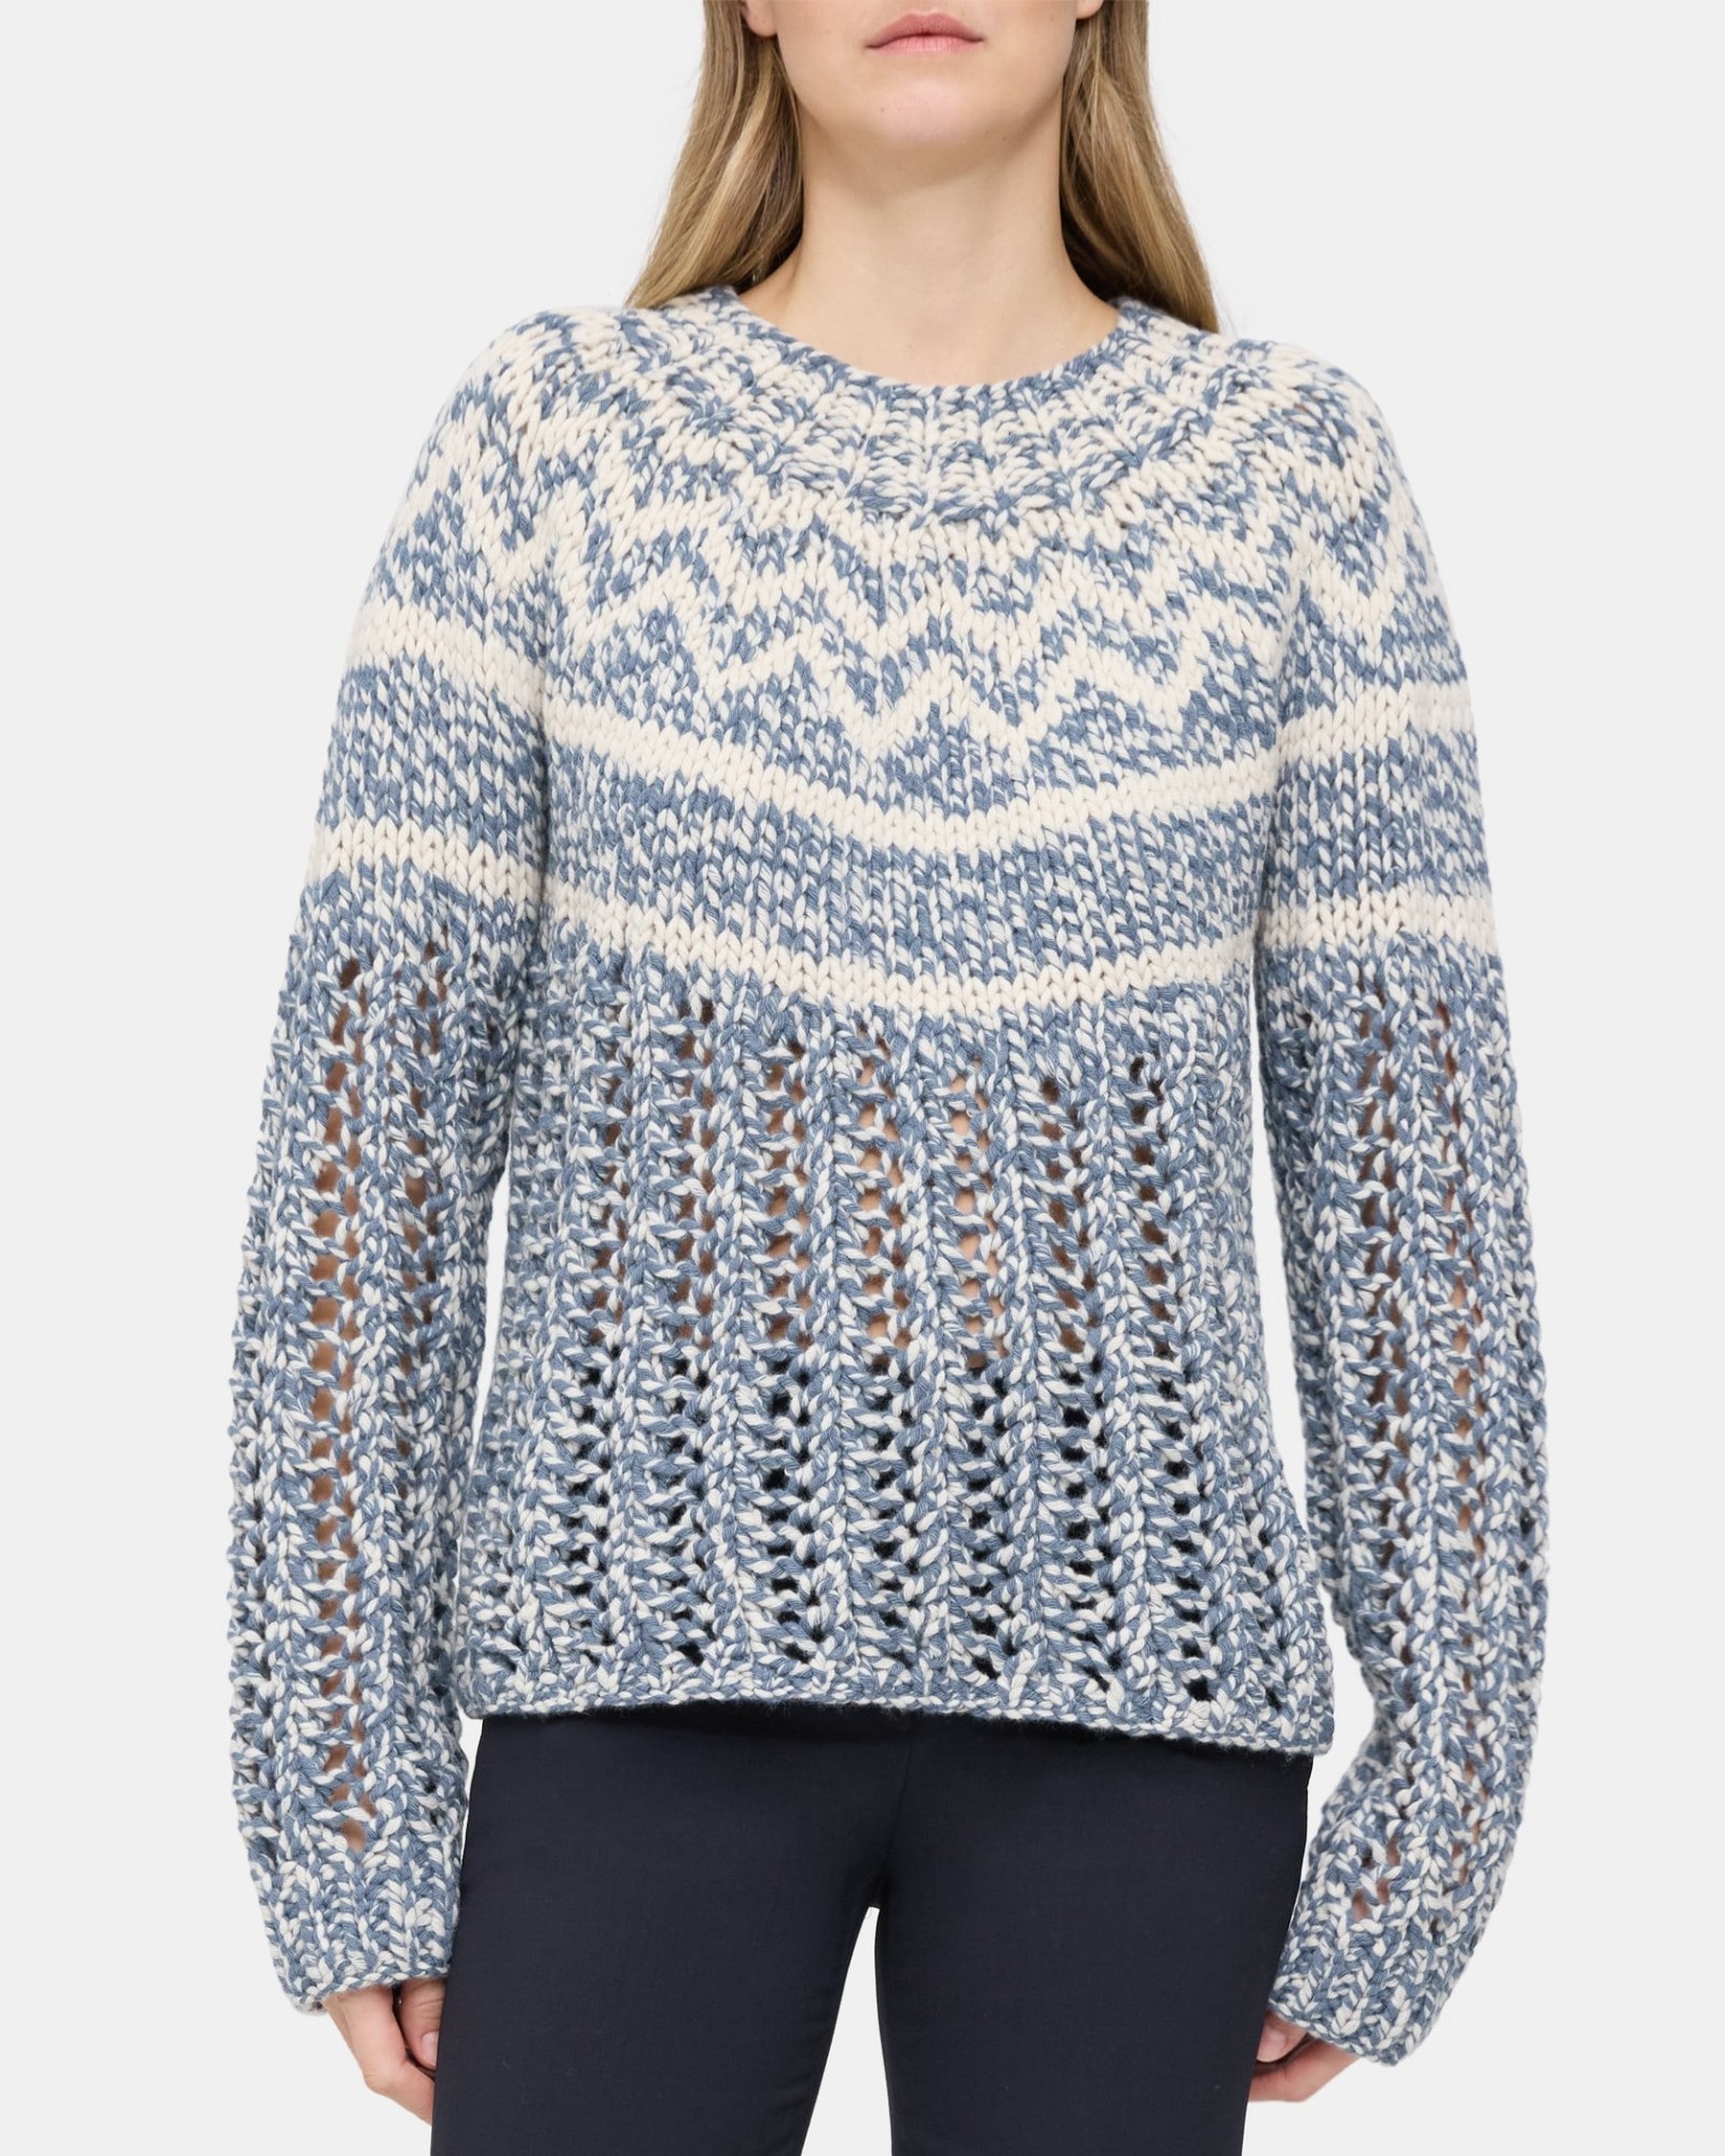 Chevron Sweater in Felted Wool-Cashmere